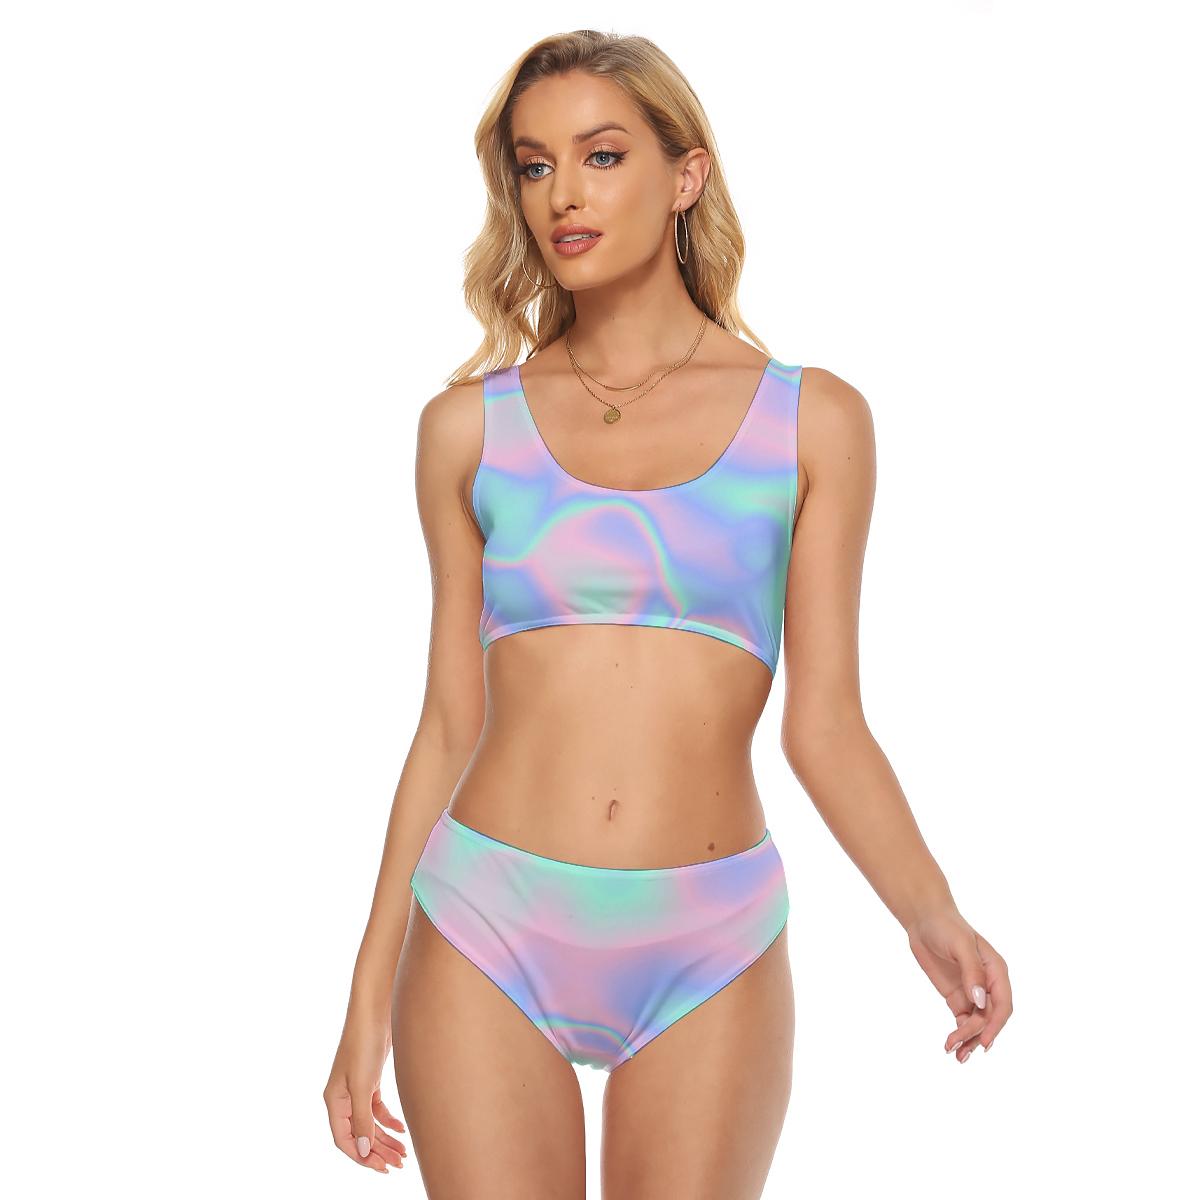 Ombre Iridescence Holographic Abstract Cotton Candy Cloud Print Women's Crop Top Swimwear Suit